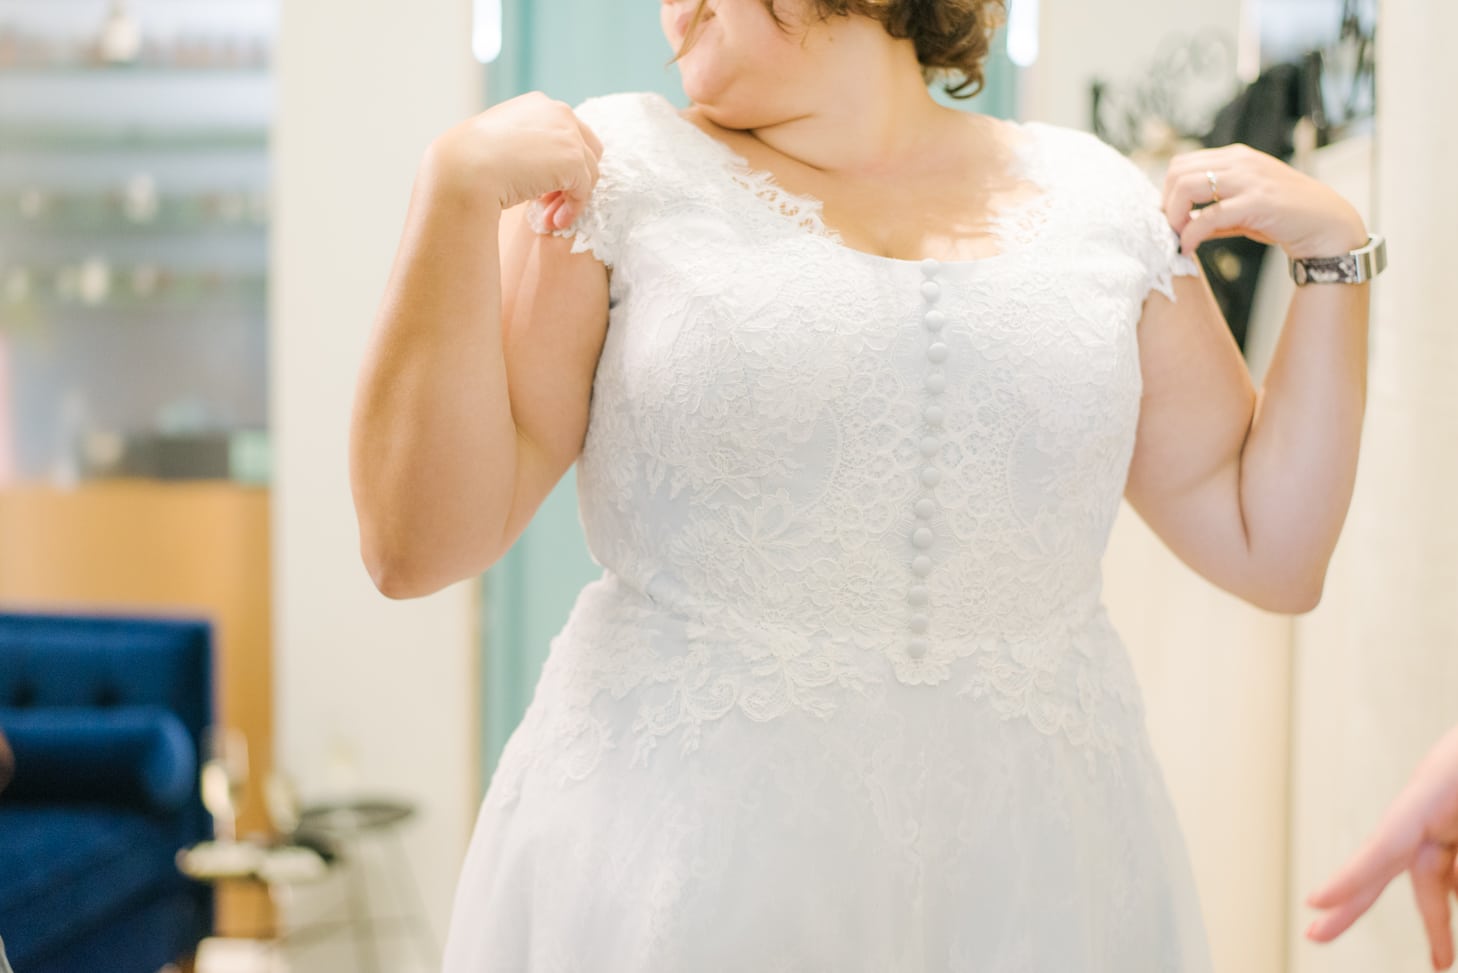 A plus size woman with short brunette hair touches her shoulders while trying on lace wedding dress with buttons down the middle